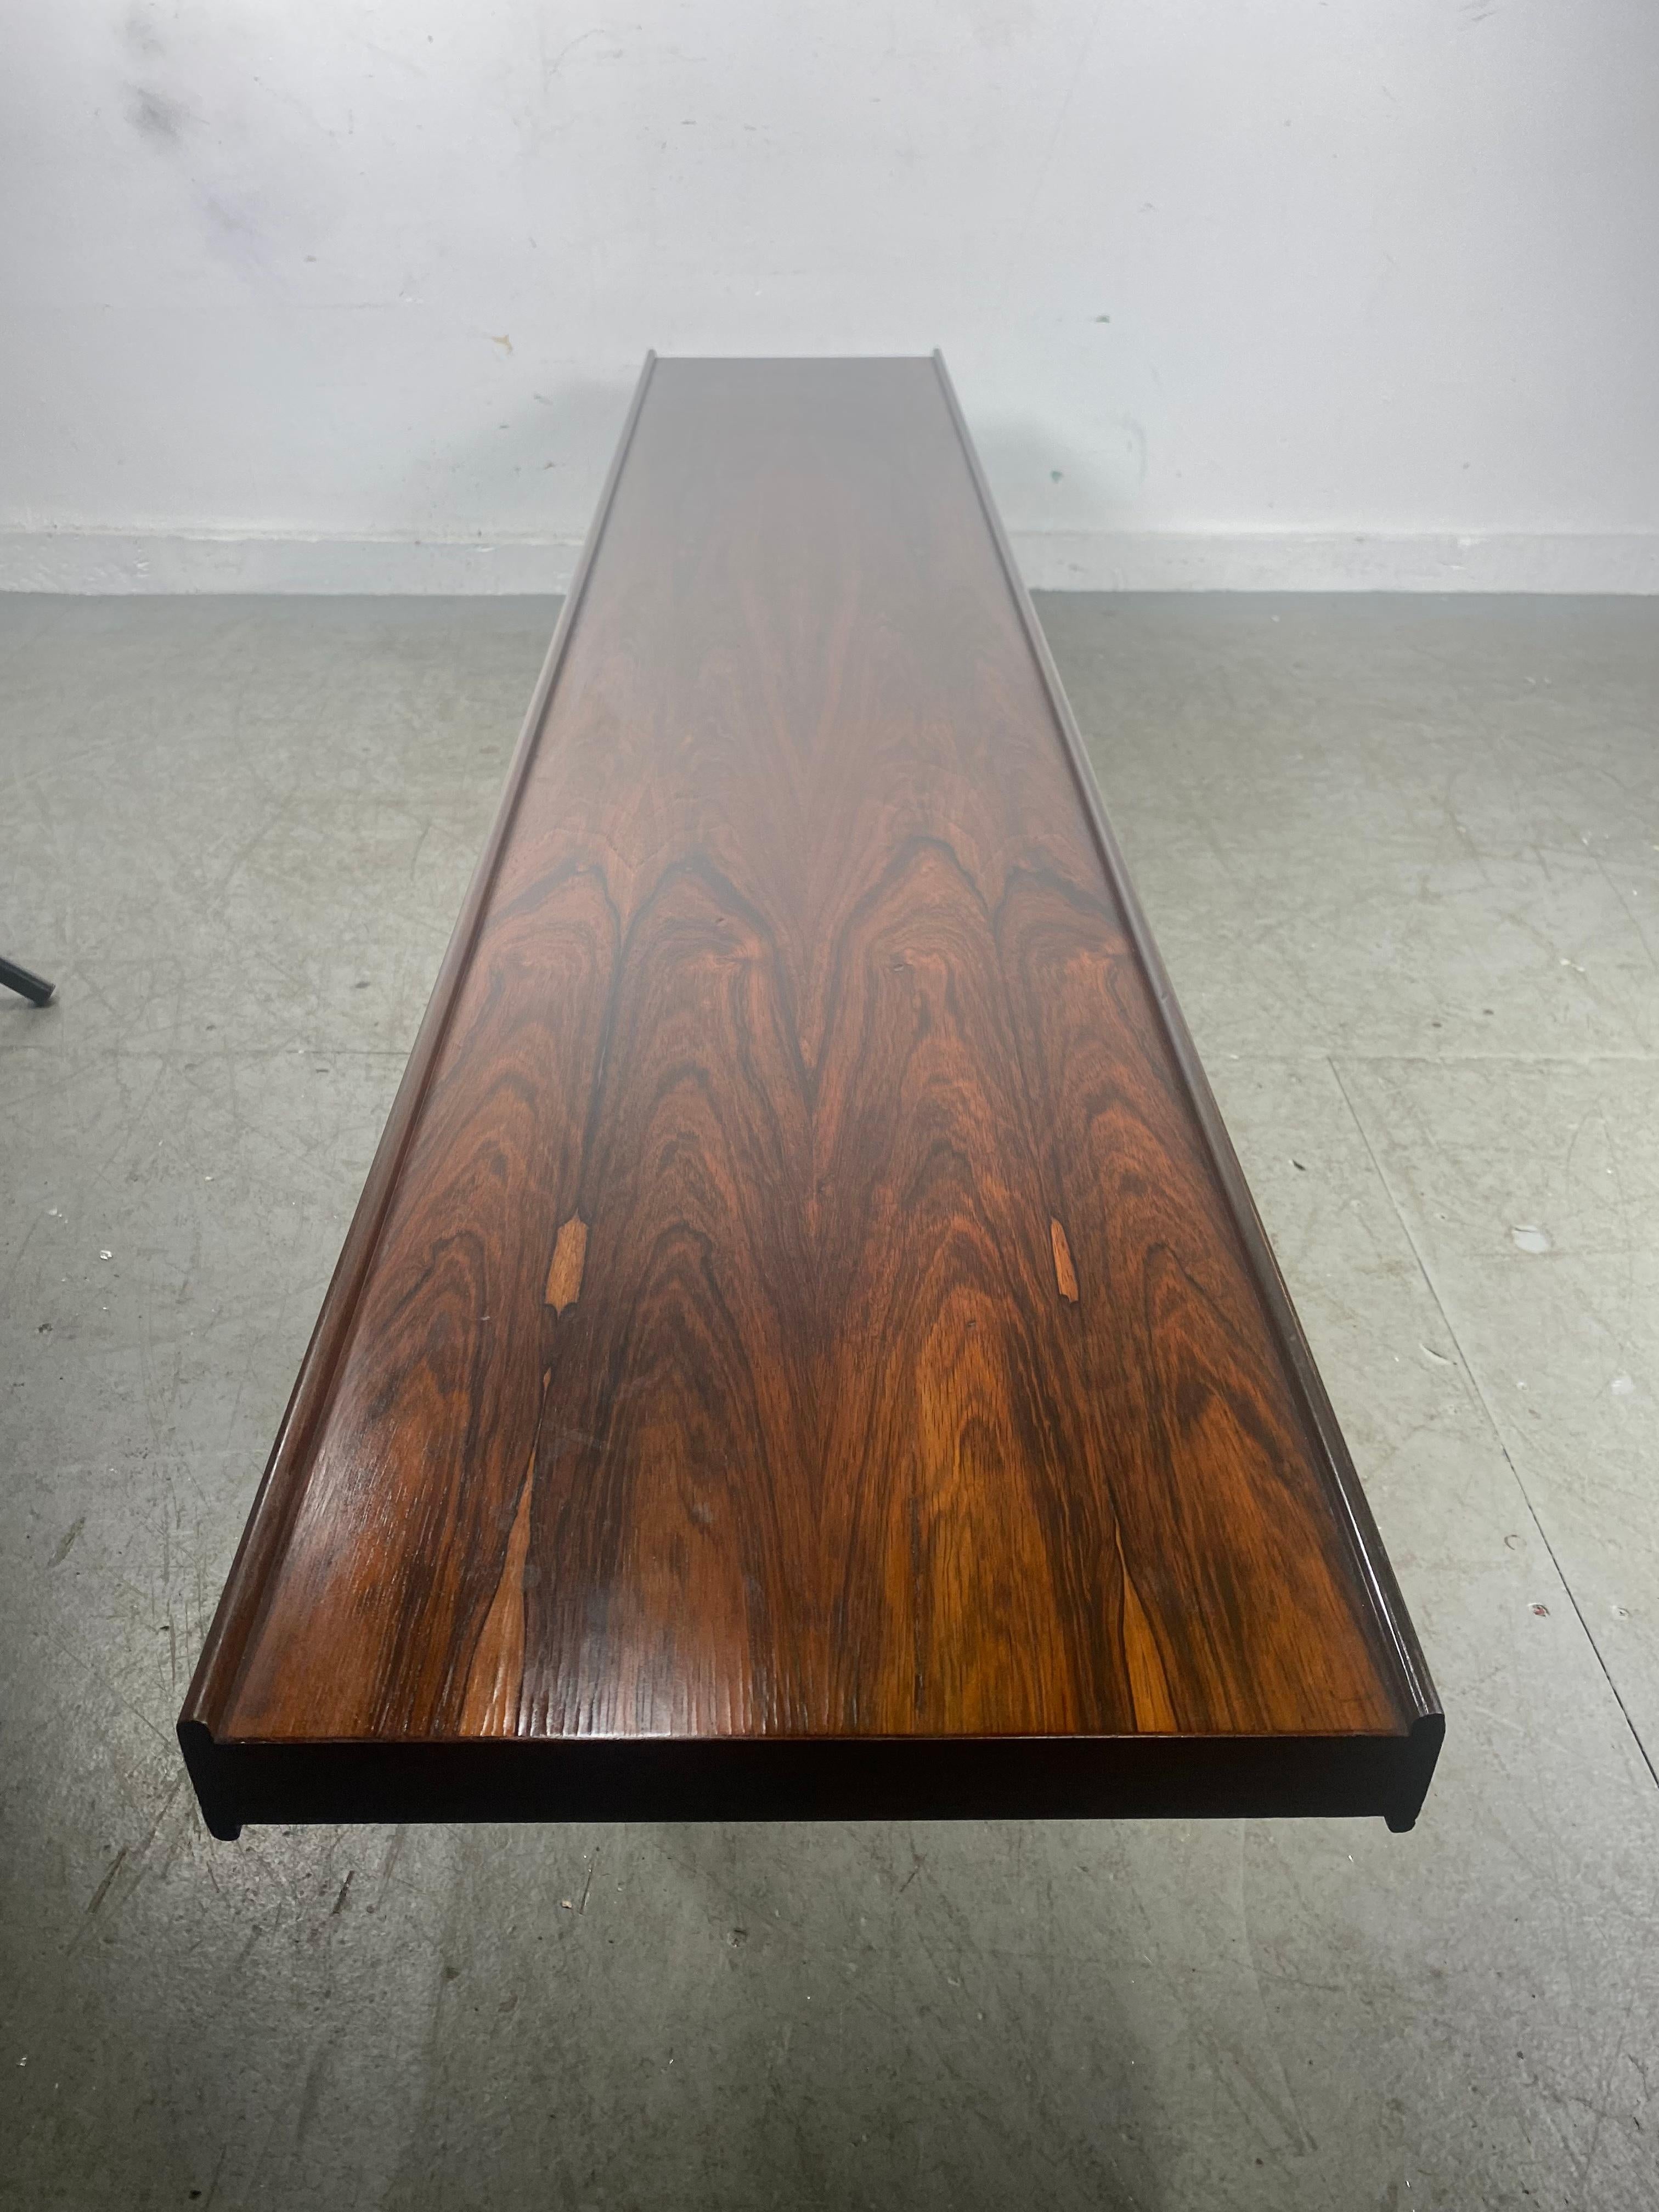 Krobo bench, table designed by Torbjørn Afdal.
Manufactured in Norway by Mellemstrands Trevareindustri during the 1960s.
Made from rosewood,,,,,Retains original label.. Hand delivery avail to New York City or anywhere en route from Buffalo